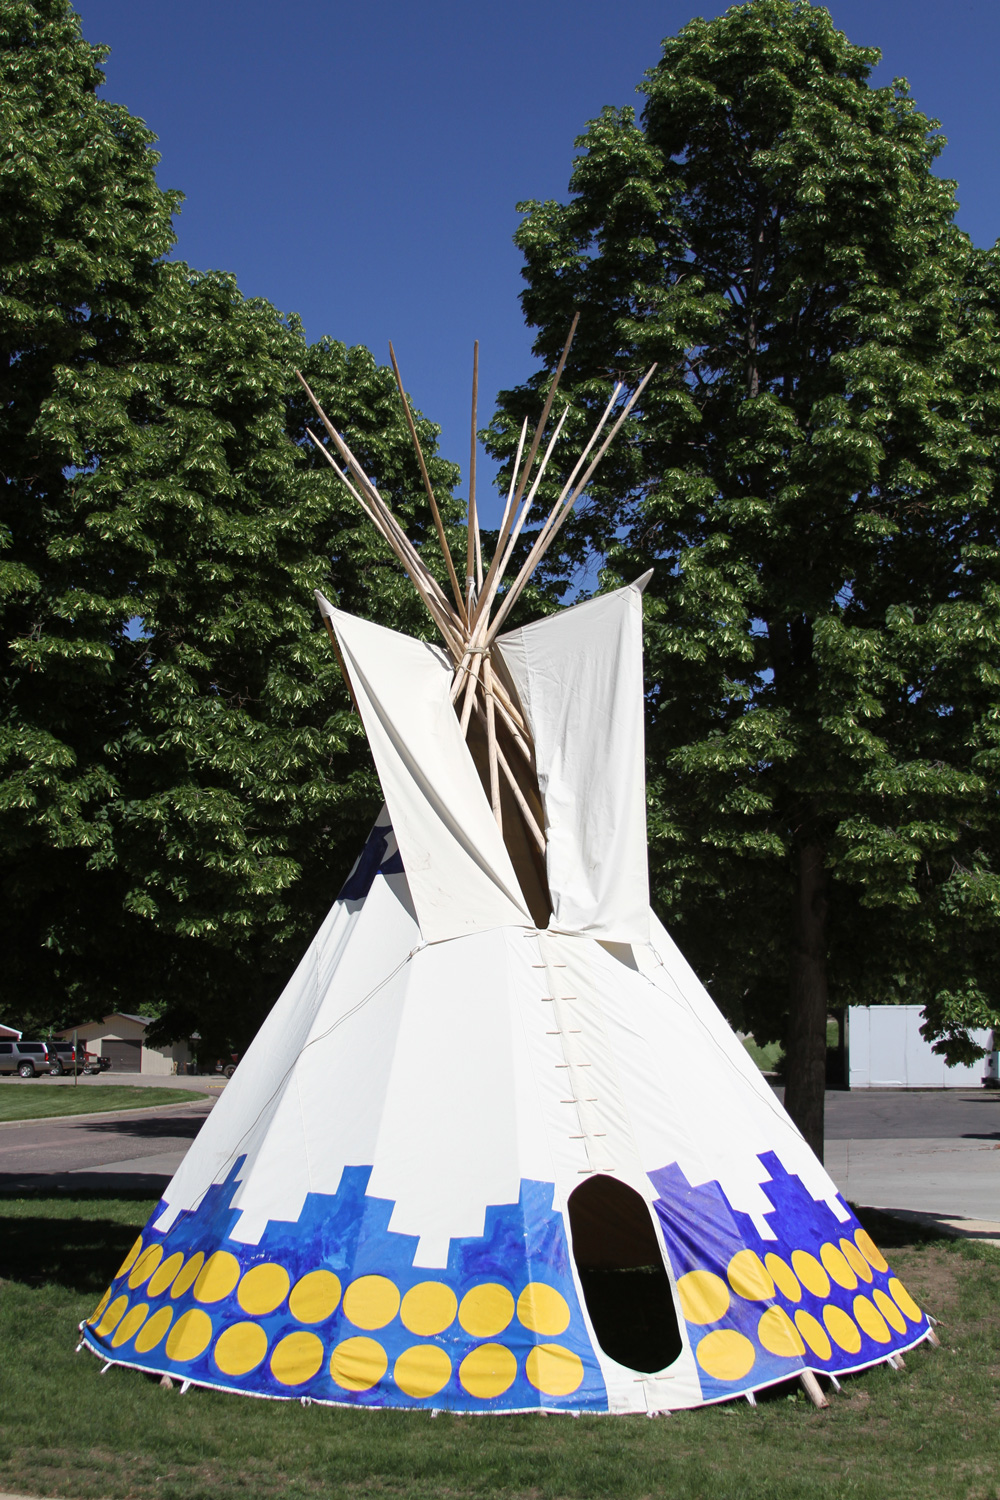 A tipi stands outside the entrance of the Akta Lakota Museum & Cultural Center.